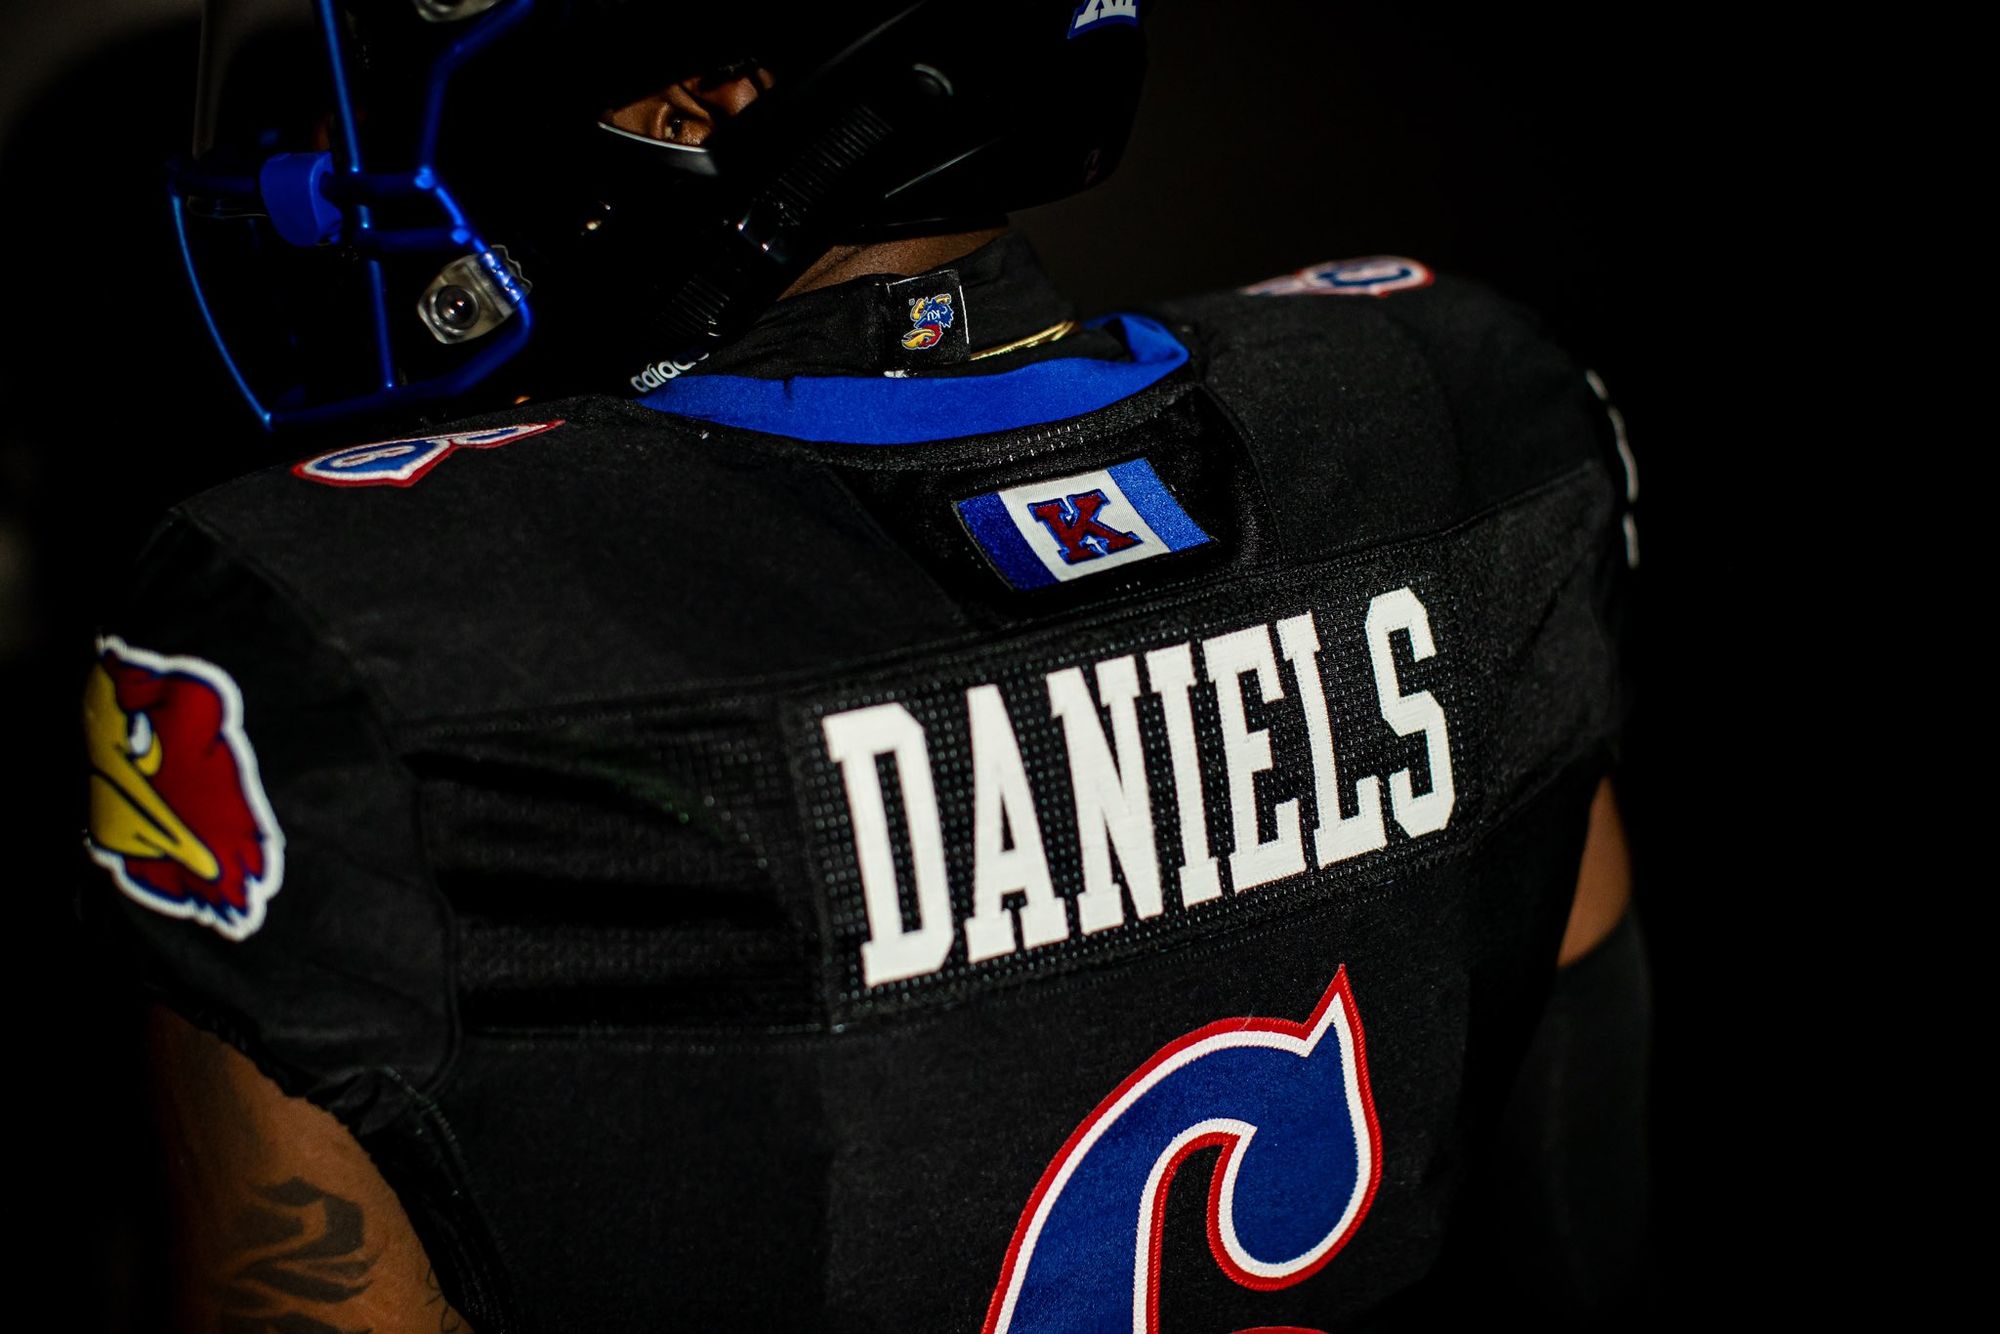 KU players excited to wear new 'Blackhawk' uniforms for Friday's game